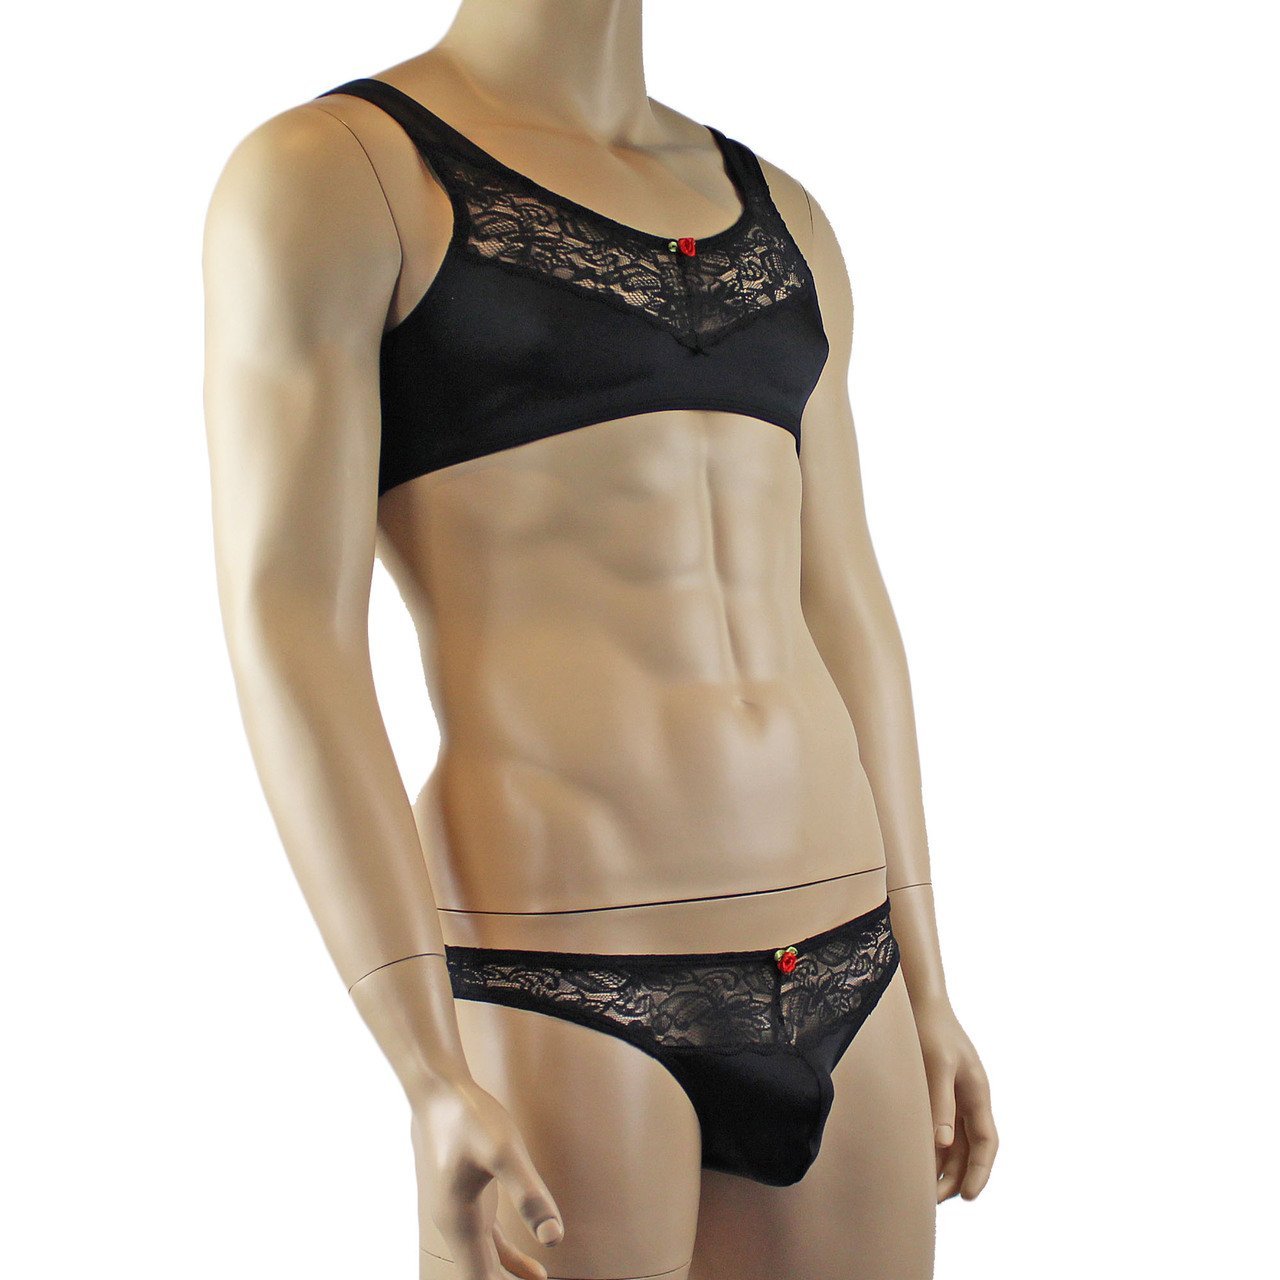 Male Lingerie Bra Top with V Lace front and Capri Bikini (black plus other colours)